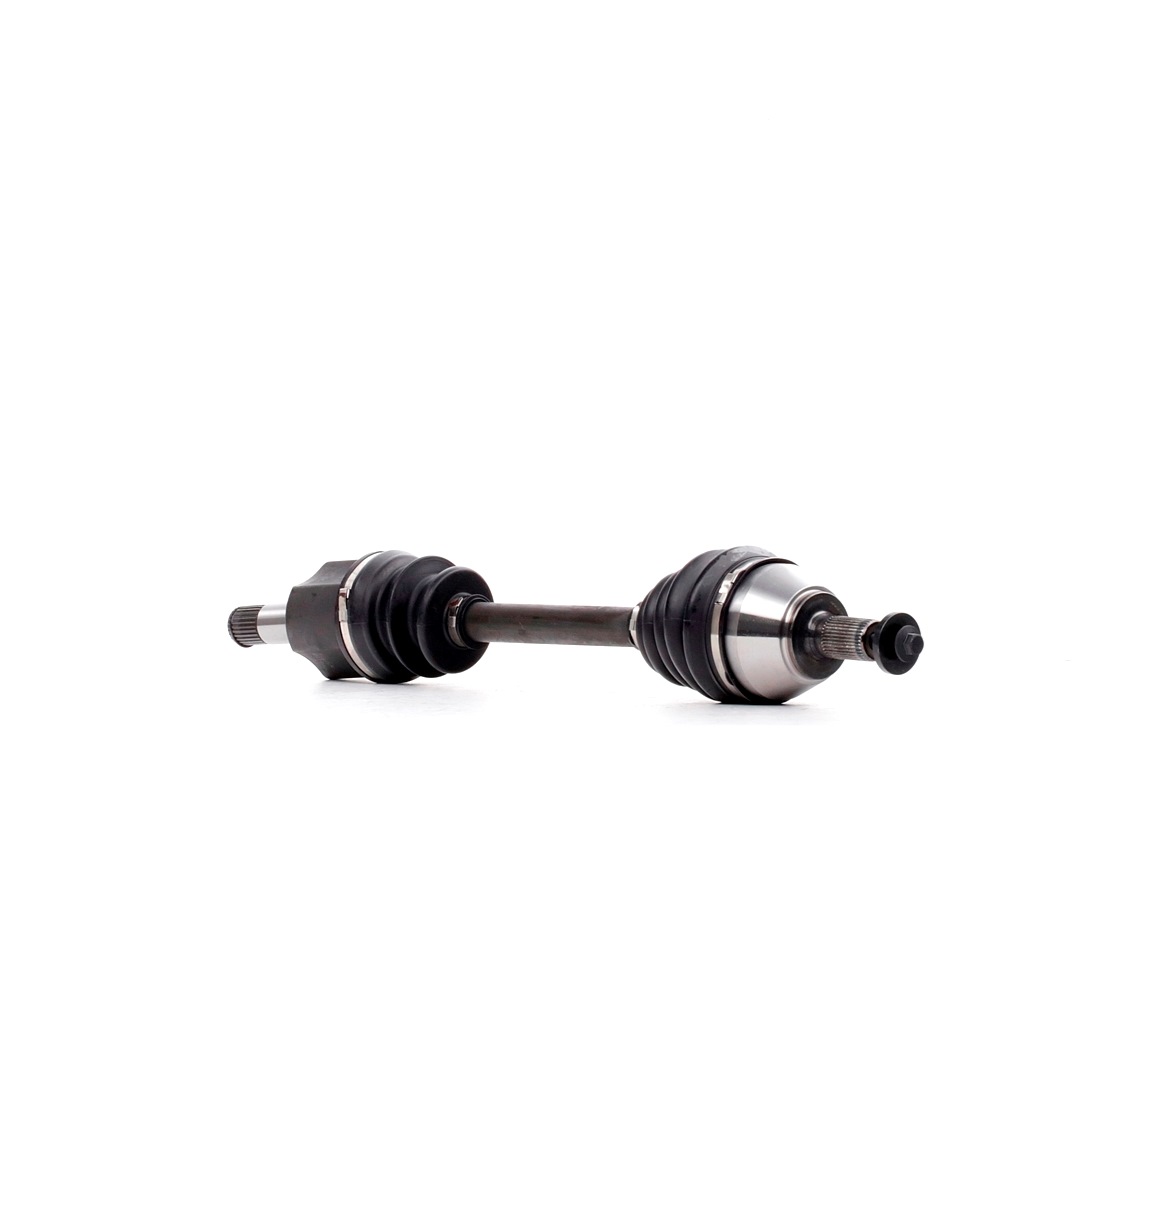 Image of RIDEX Drive shaft FORD,VOLVO 13D0085 1223785,1223788,1223791 CV axle,Half shaft,Driveshaft,Axle shaft,CV shaft,Drive axle 1305327,1305328,1305939